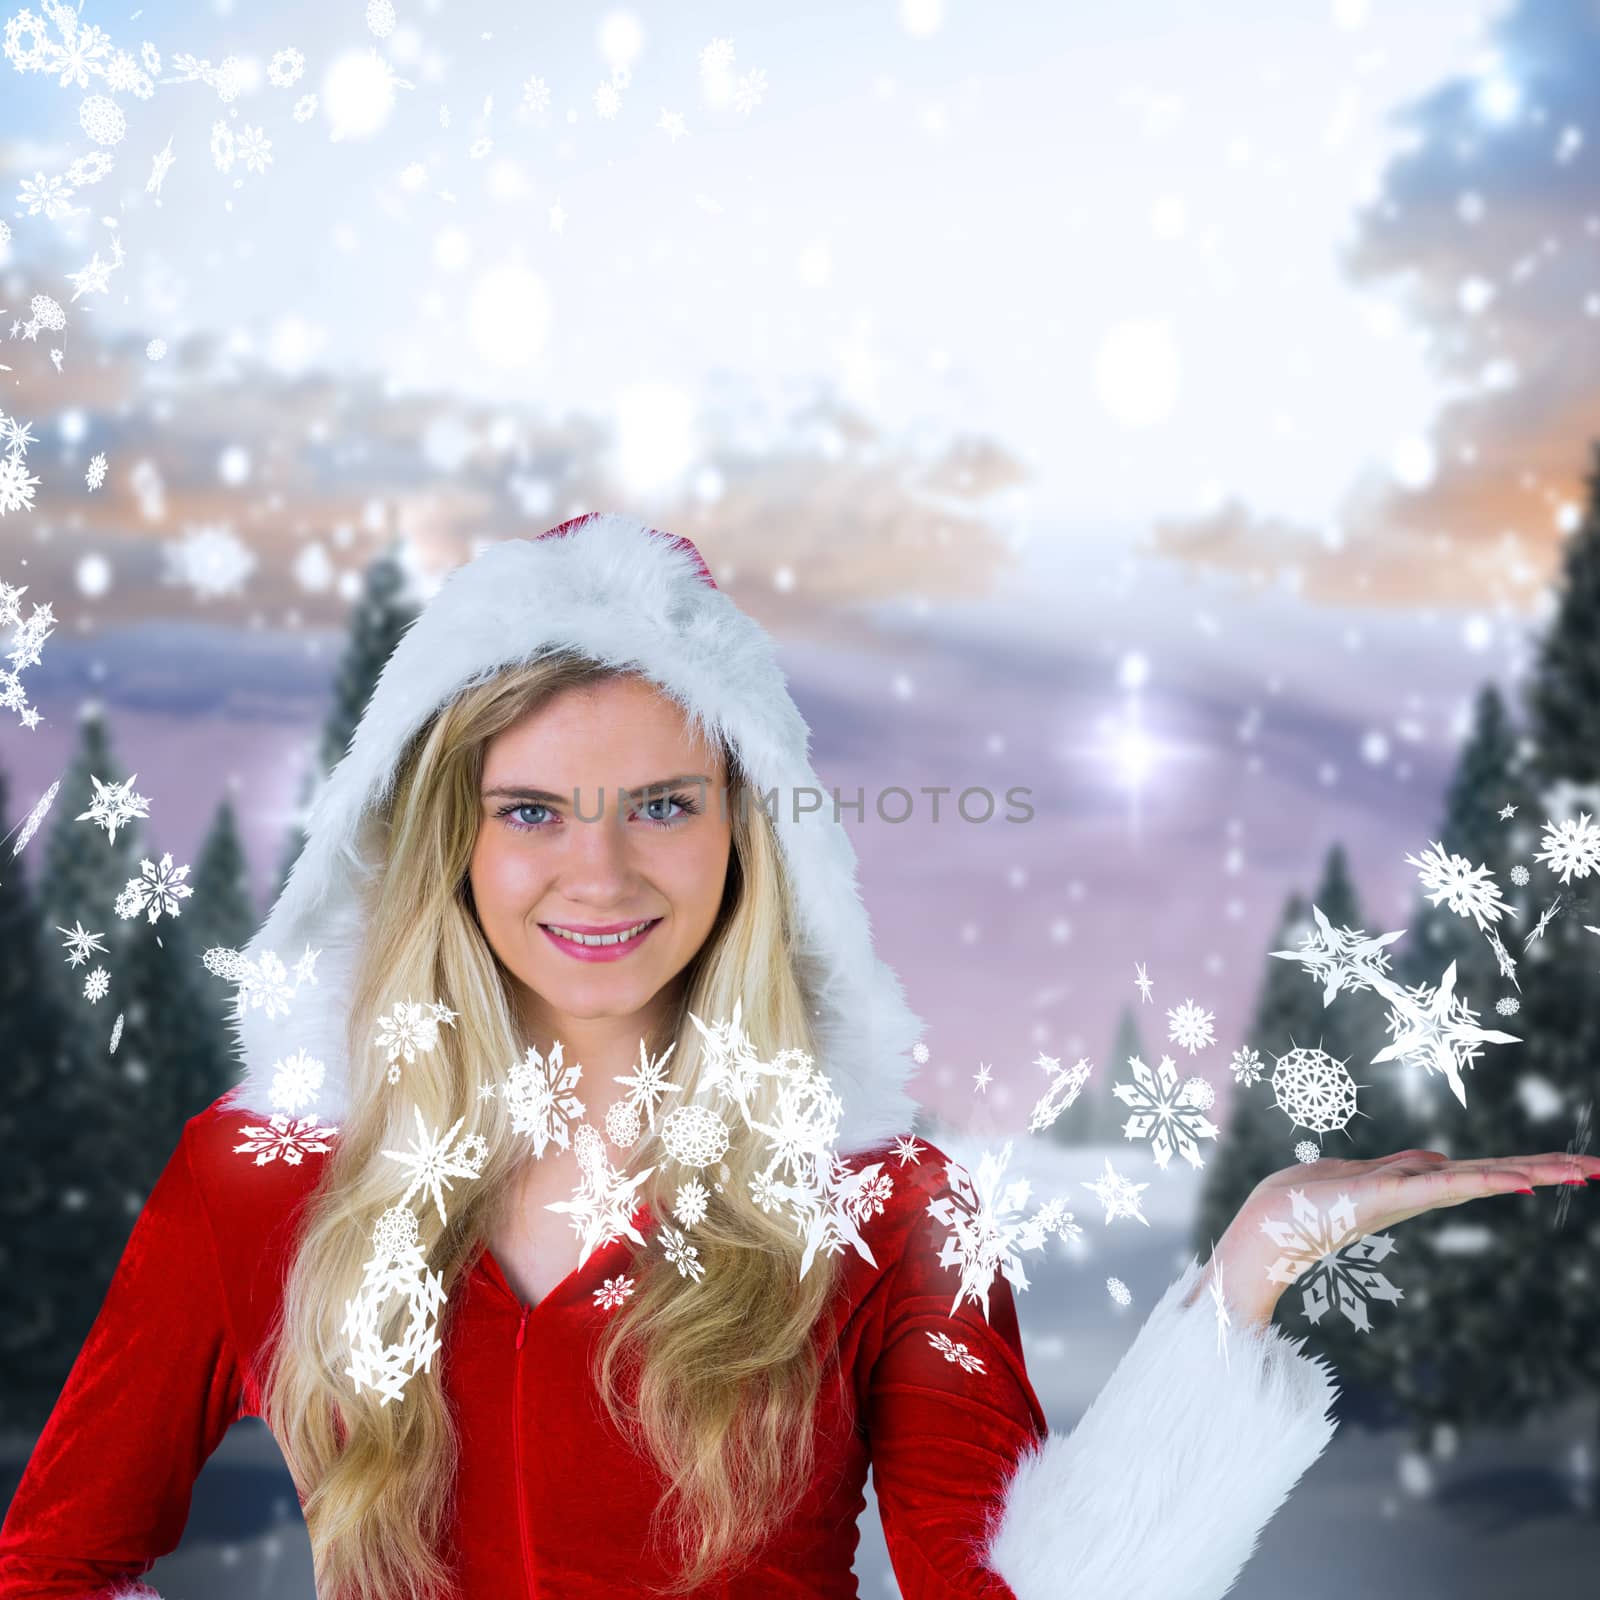 Pretty girl presenting in santa outfit against snowy landscape with fir trees